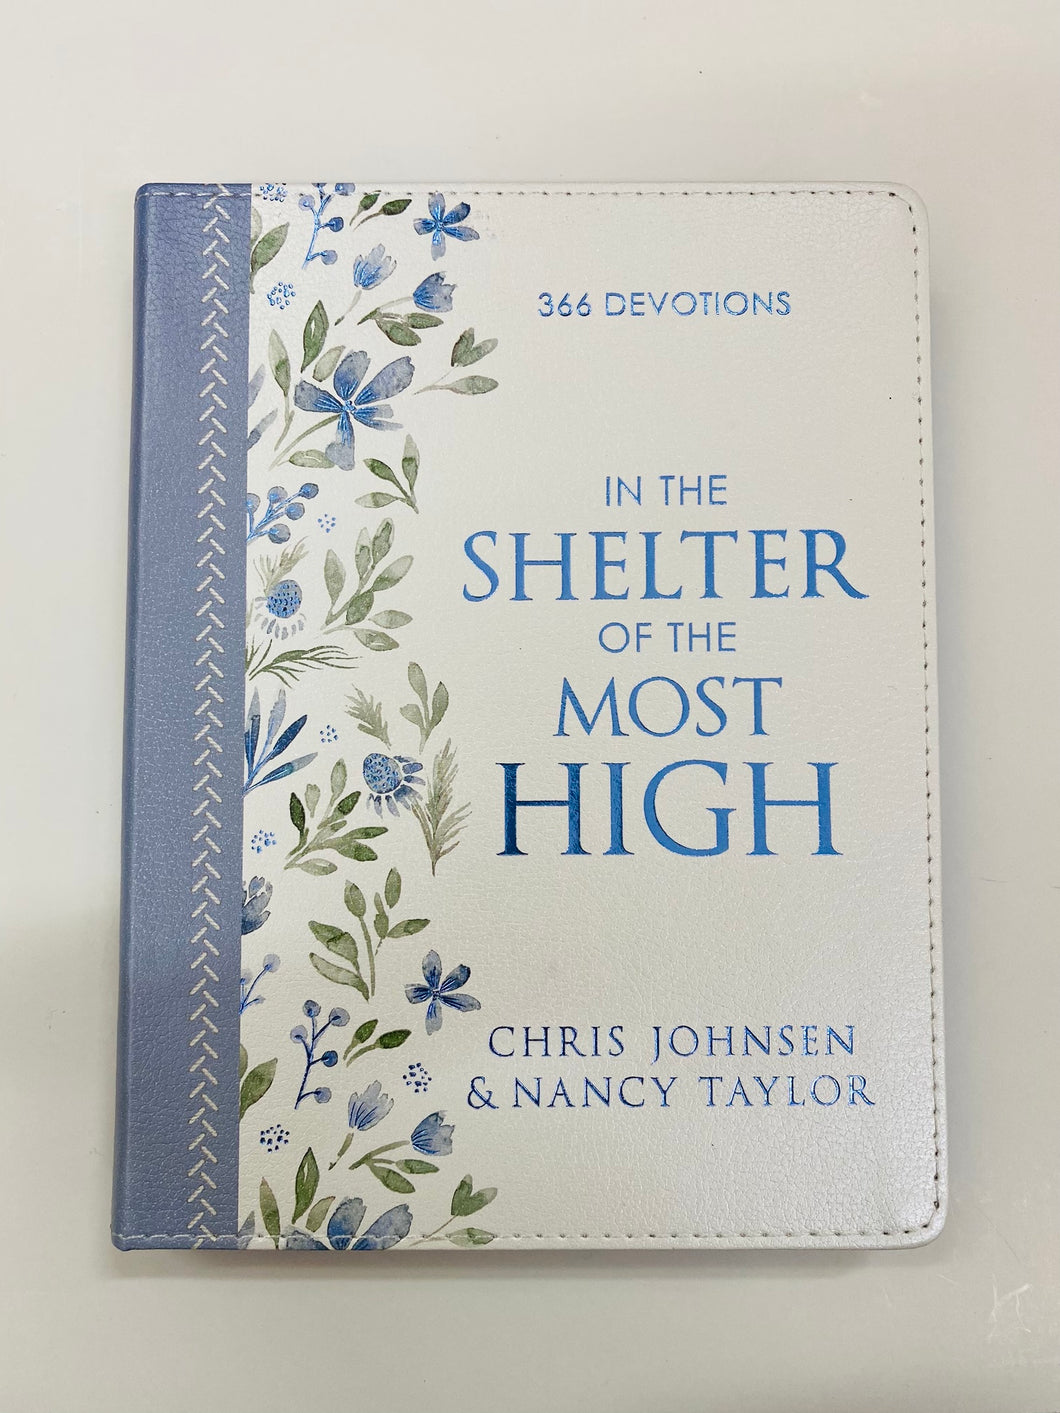 In The Shelter of the Most High